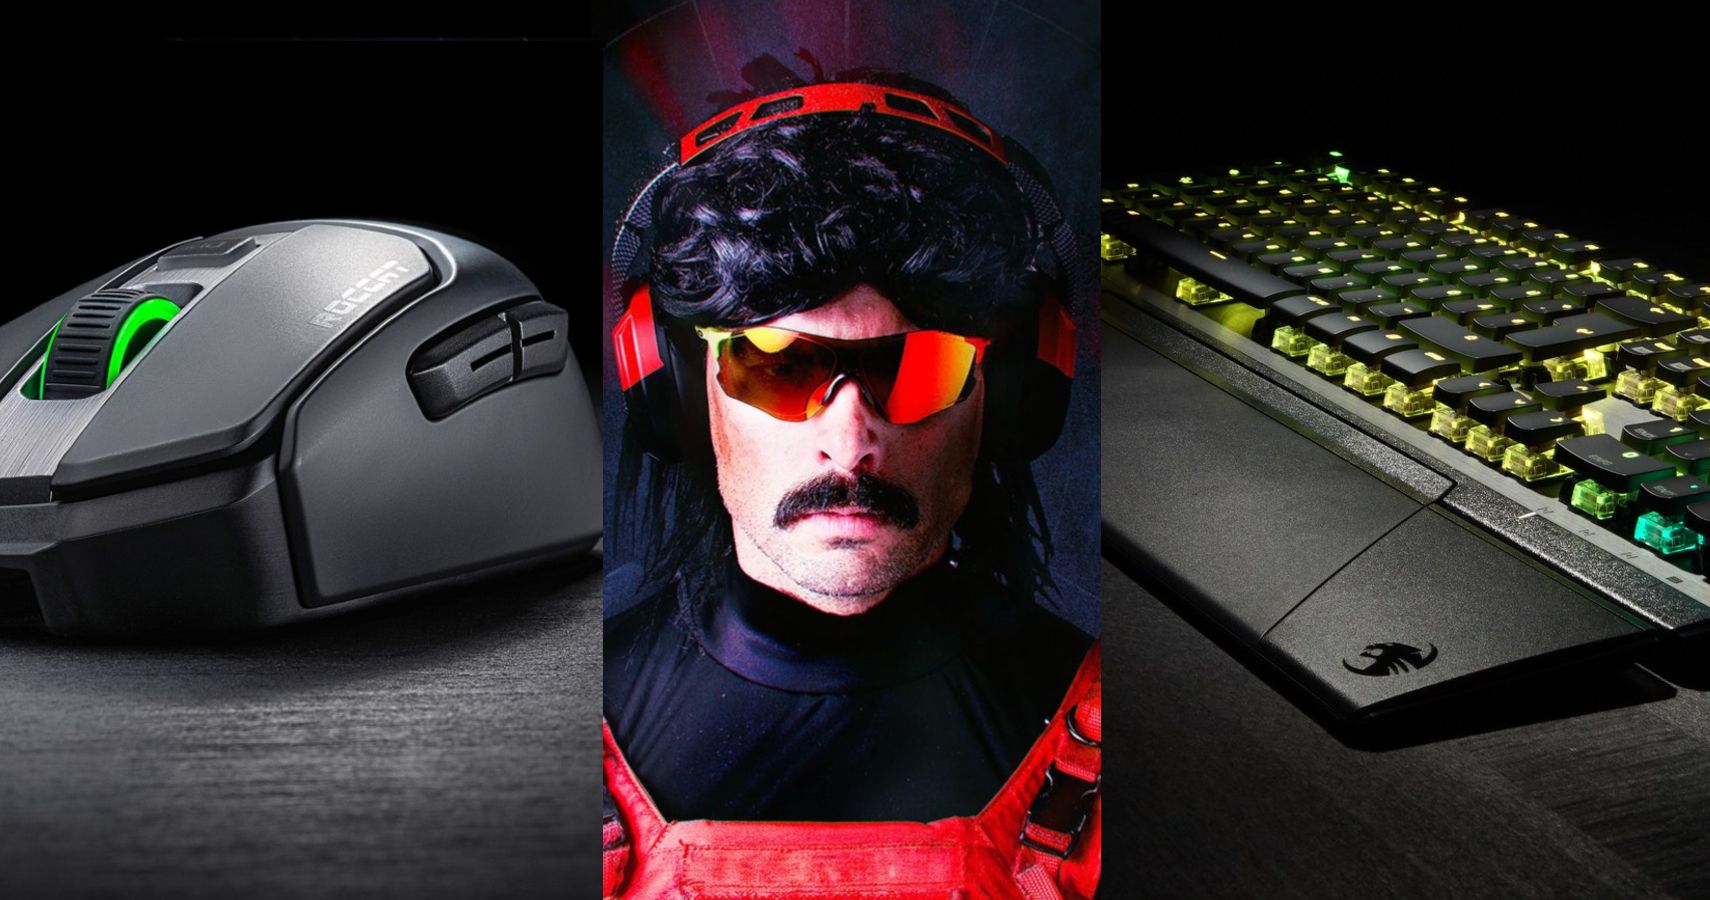 Roccat Vulcan 1 Aimo Keyboard Kain 0 Aimo Wireless Mouse Review Game Like Dr Disrespect